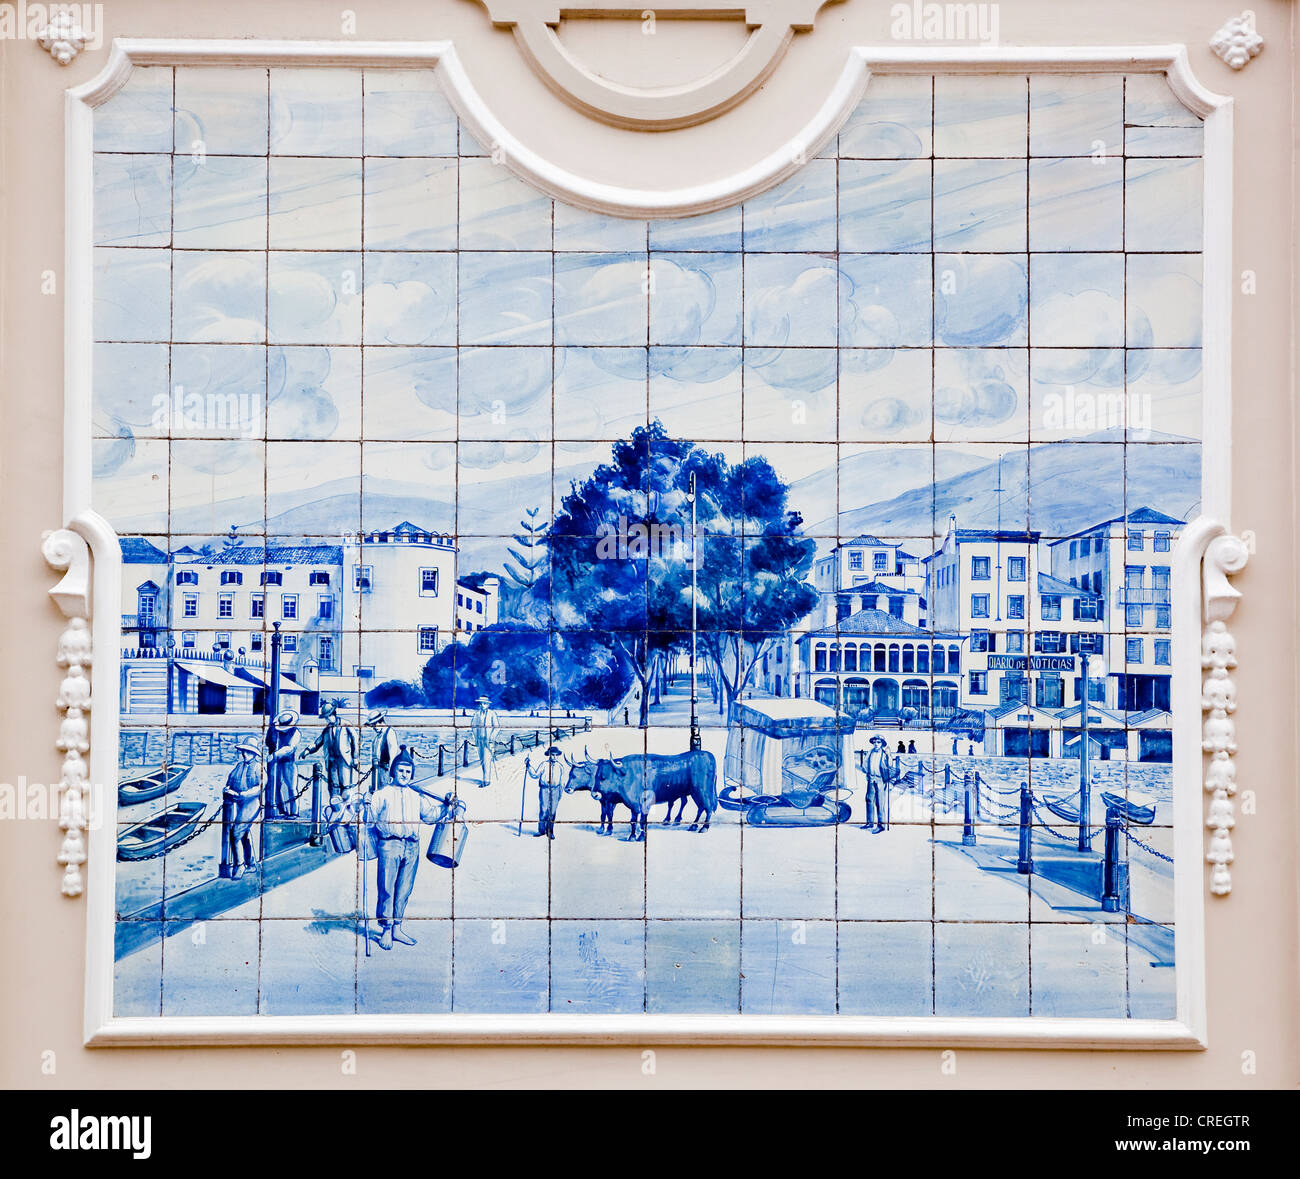 Azulejo, mural made of painted ceramic tiles, rural scene in Funchal, on the local theatre in Funchal, Madeira, Portugal, Europe Stock Photo